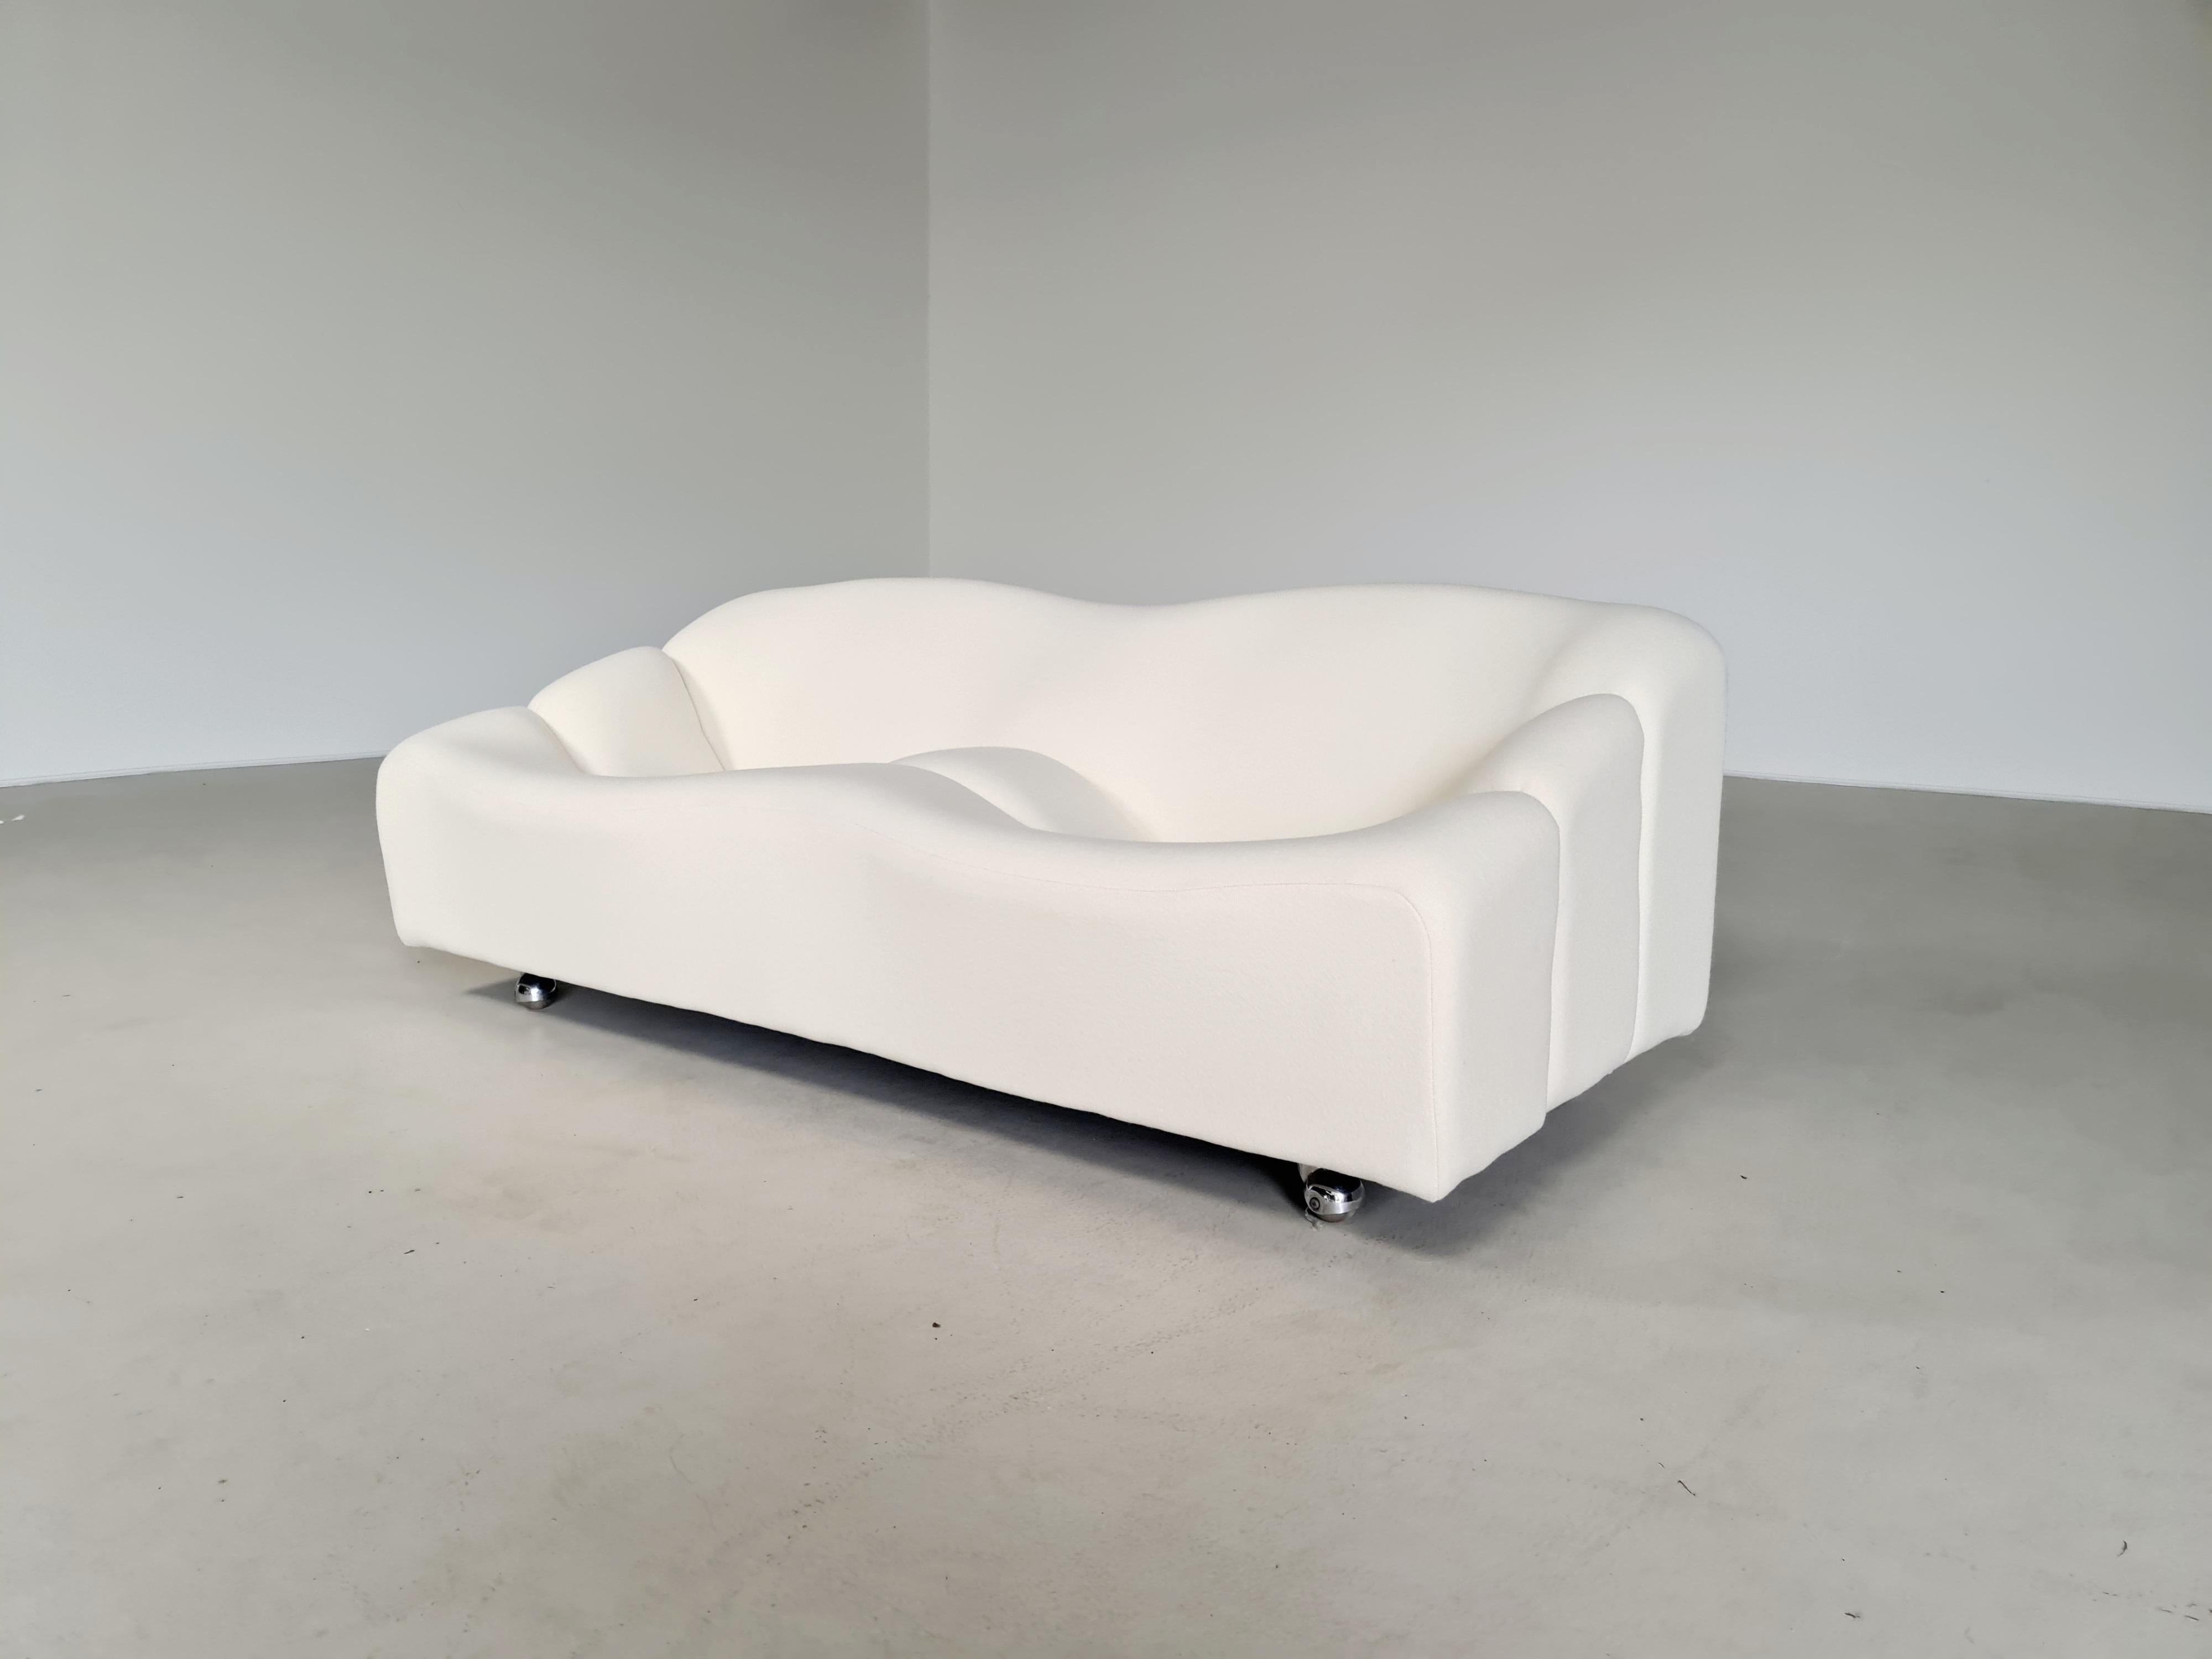 ABCD sofa designed by Pierre Paulin and manufactured during the 1960s by Artifort, Netherlands. This is a very rare and highly sought after and collectable piece, this early version features metal casters, newer editions have cube legs. The piece is